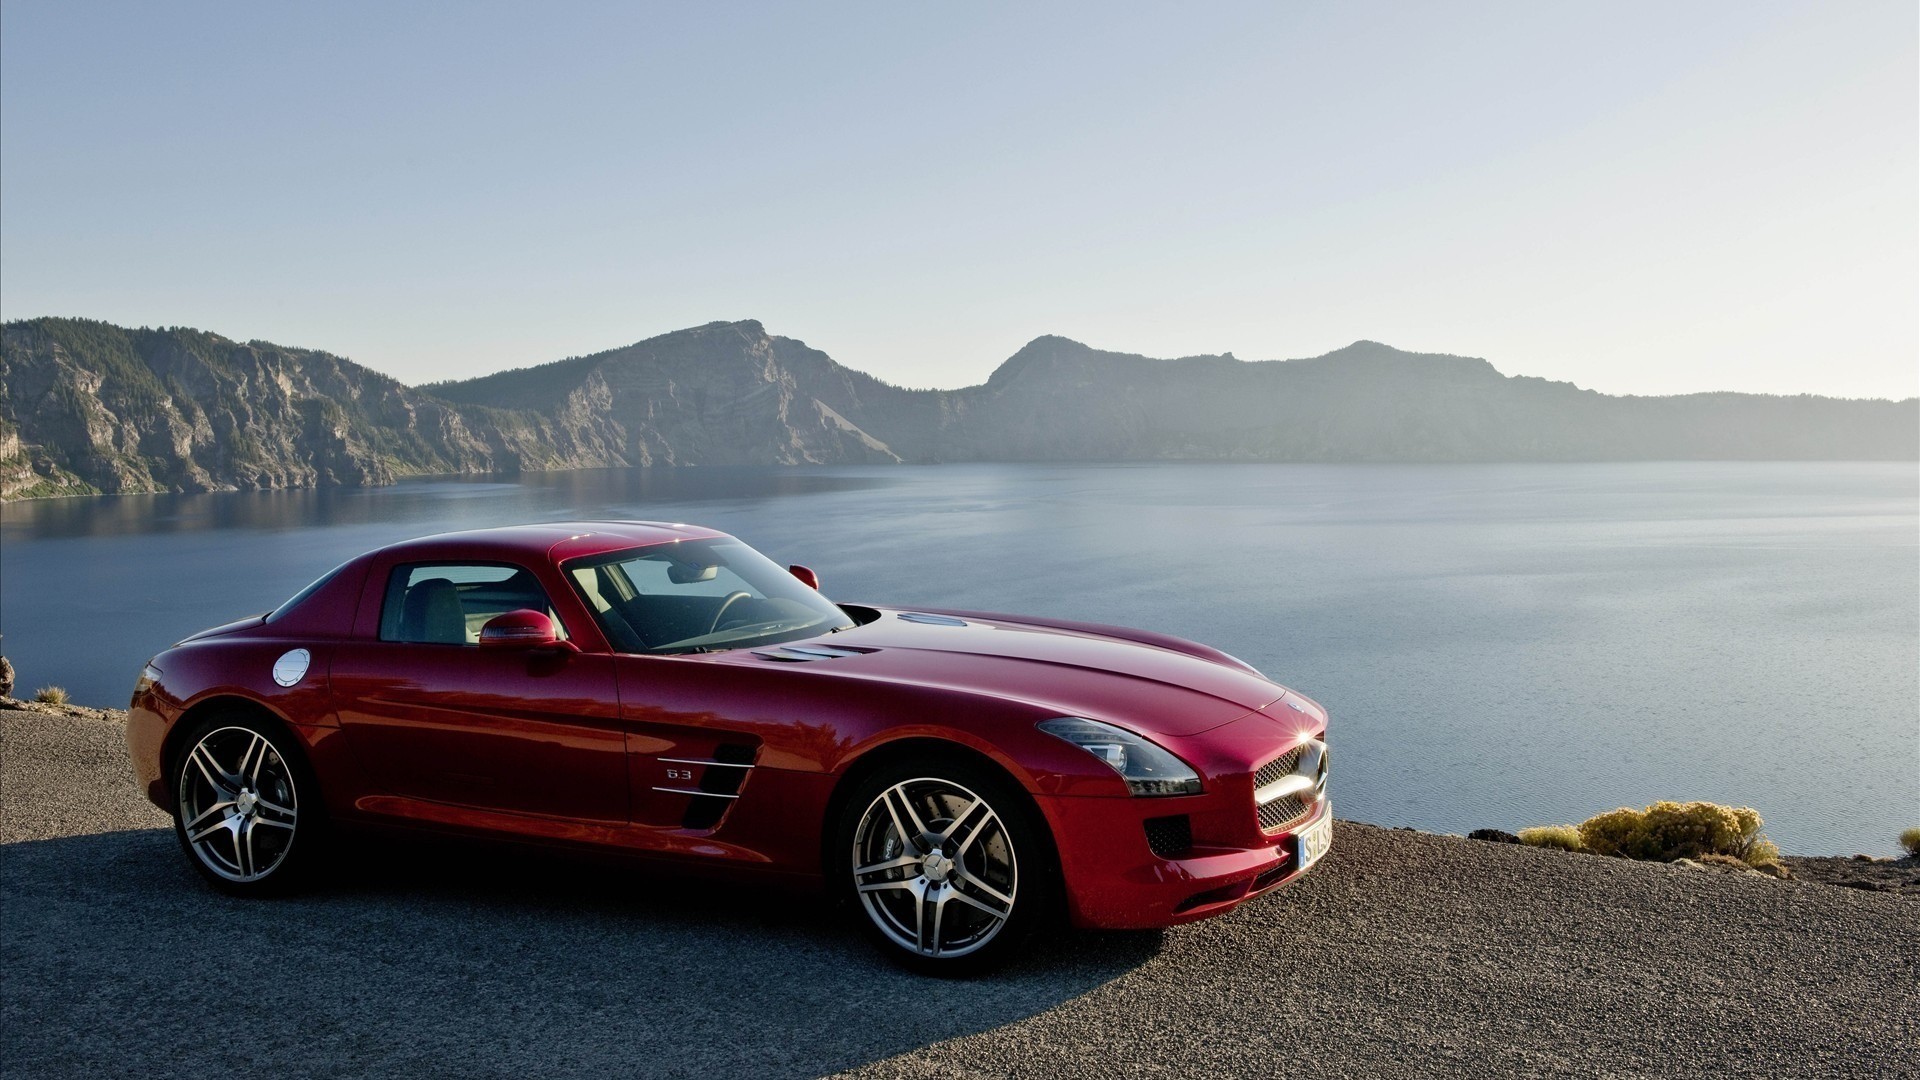 General 1920x1080 Mercedes-Benz red cars vehicle landscape car water outdoors Mercedes-Benz SLS AMG sky sunlight ground side view headlights licence plates